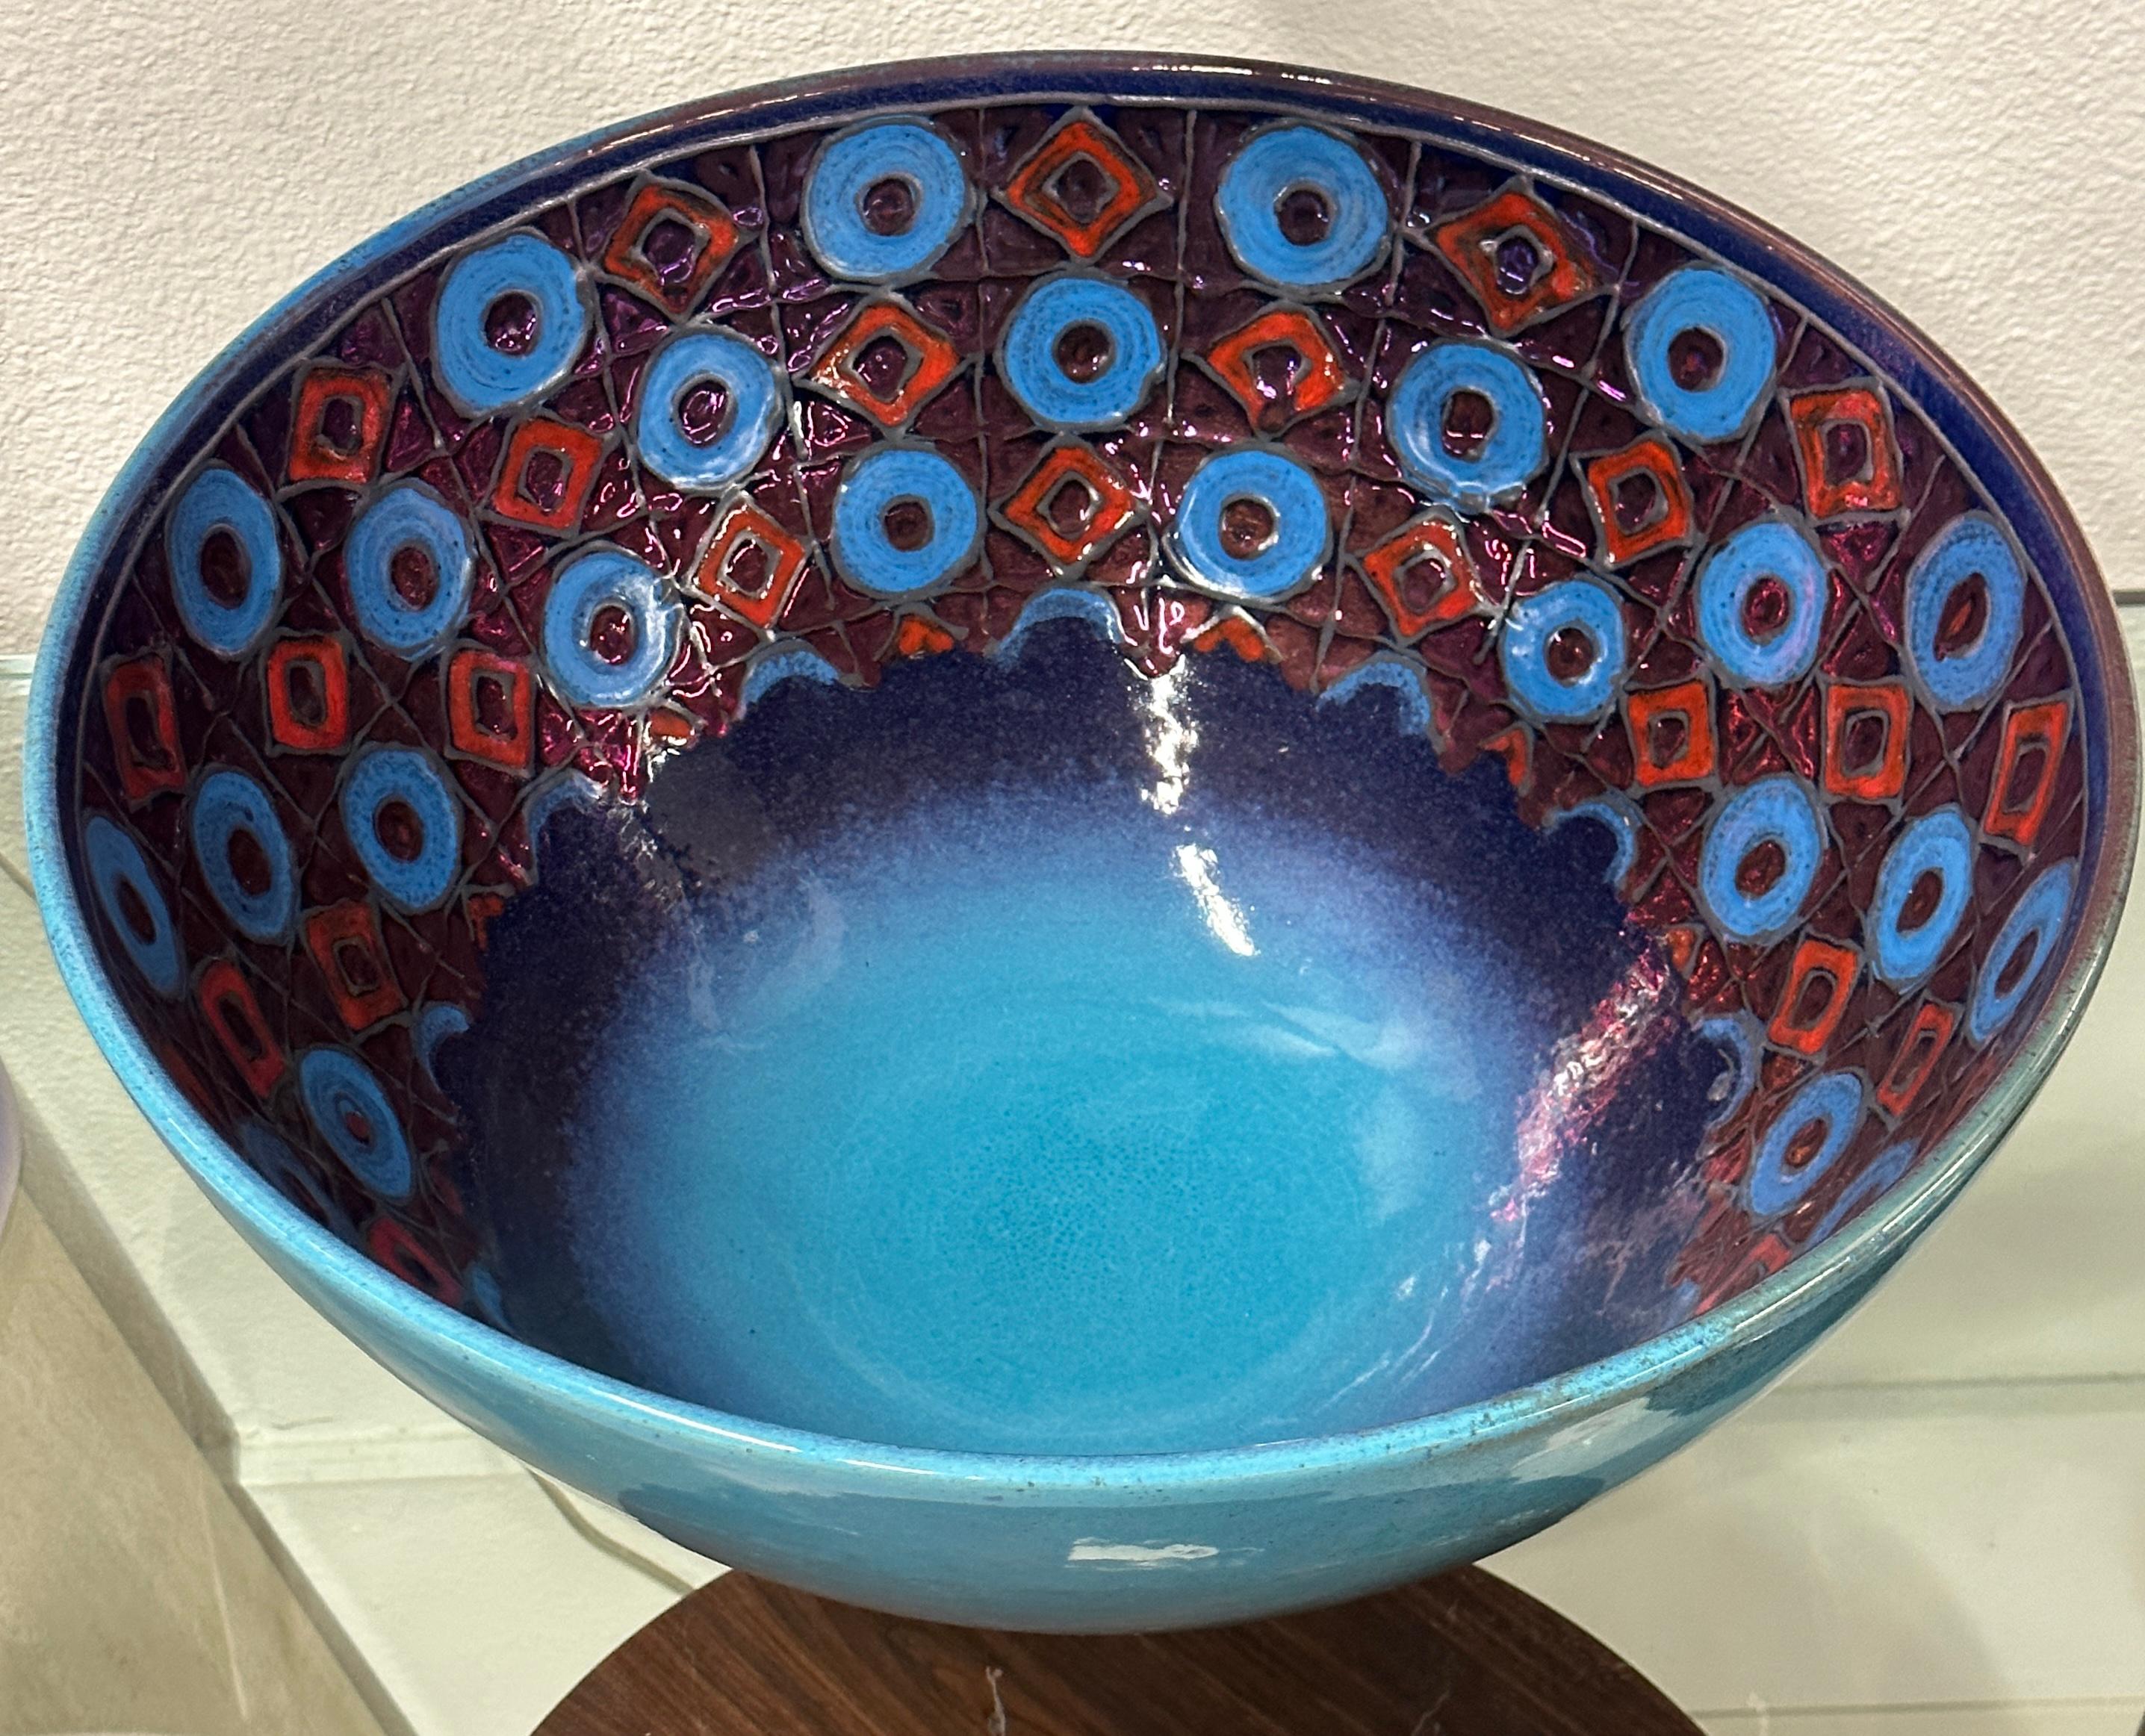 A stunning massive pottery bowl by Bottega Vignoli of Faenza Italy. The firm was founded in 1976 by sisters Saura and Ivana. This vibrant piece is signed and dated on the bottom 2014. Marked special collection 5/5. In good condition.